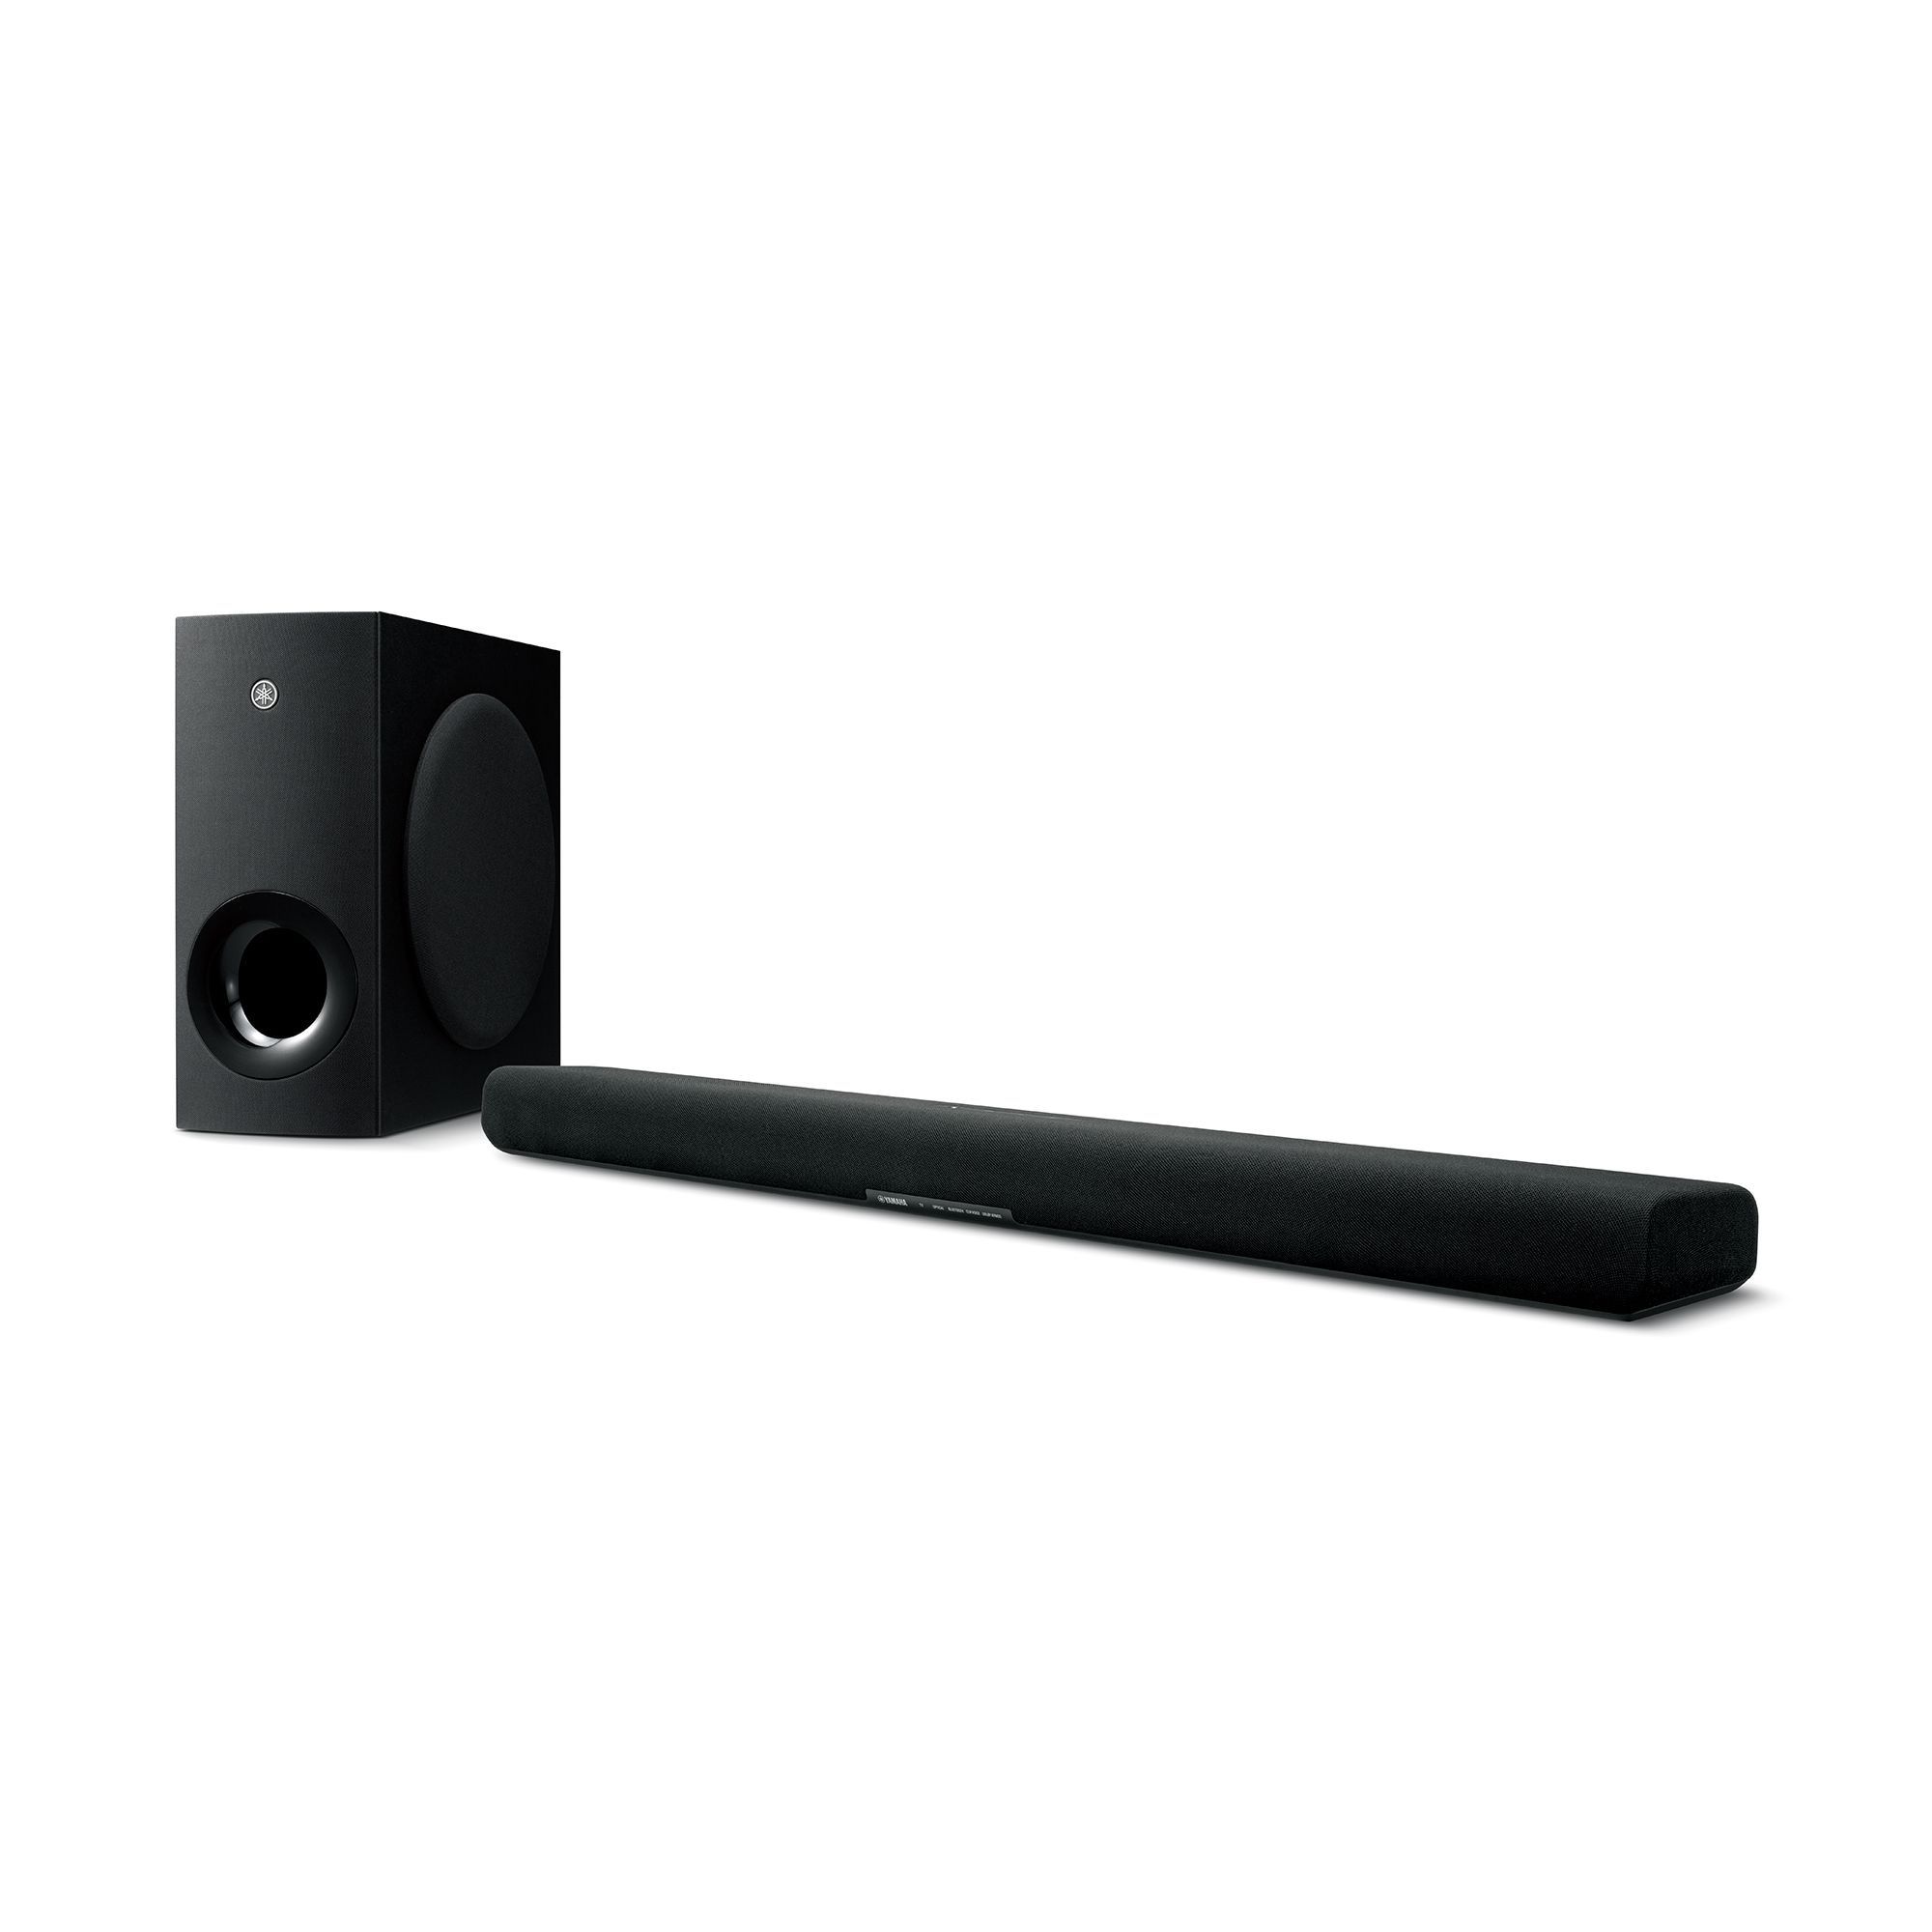 Yamaha SR-B40A Dolby Atoms Sound Bar with Wireless Subwoofer